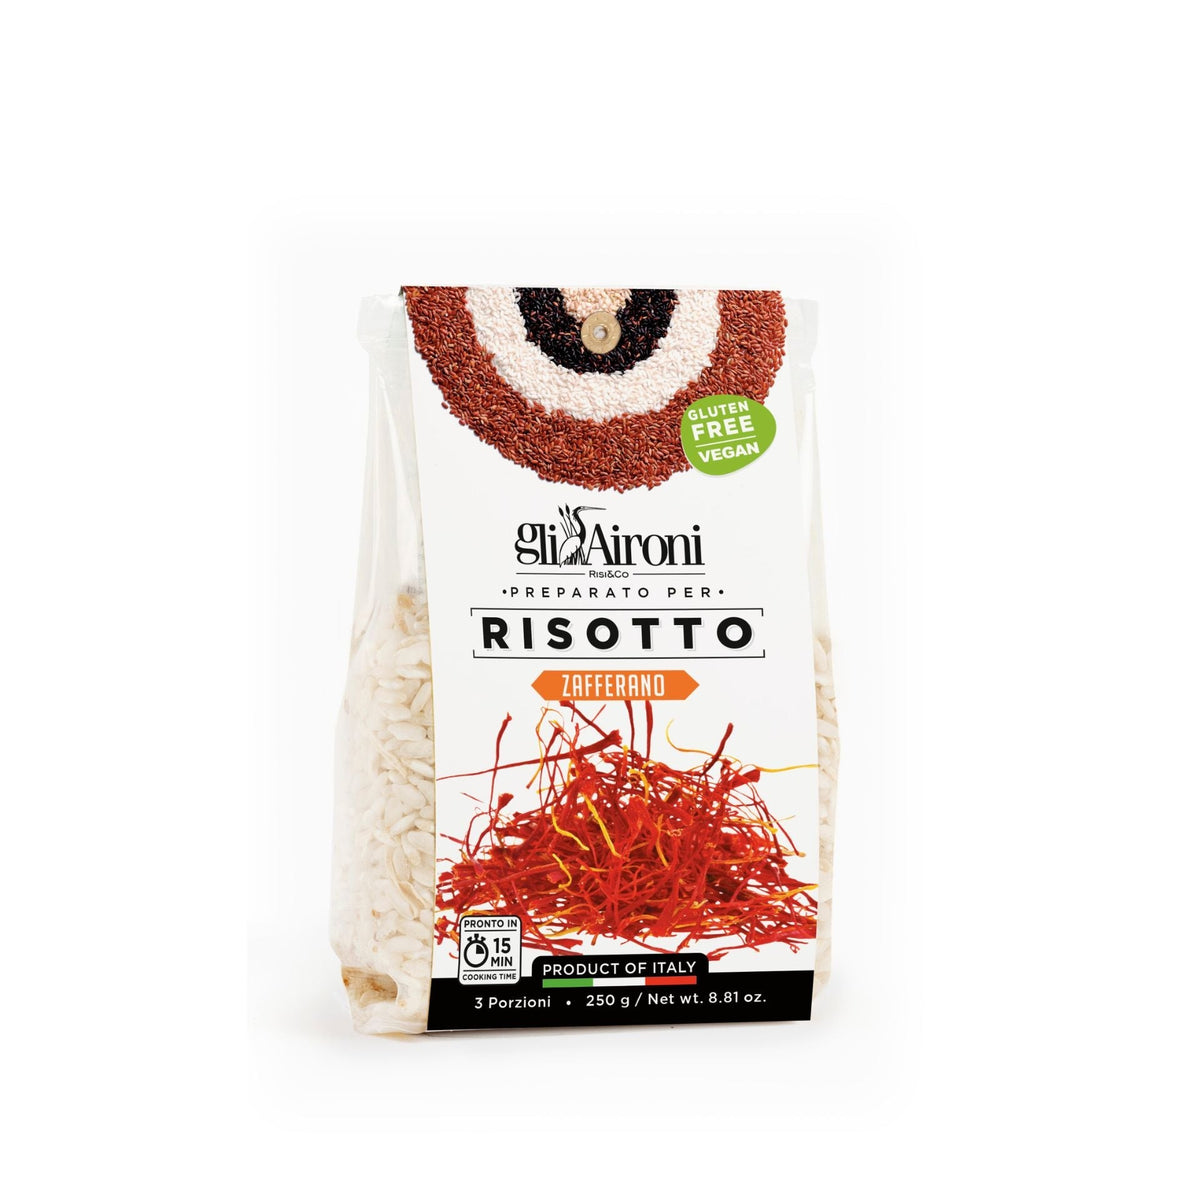 Gli Aironi Saffron Risotto 250g (Bag)  | Imported and distributed in the UK by Just Gourmet Foods